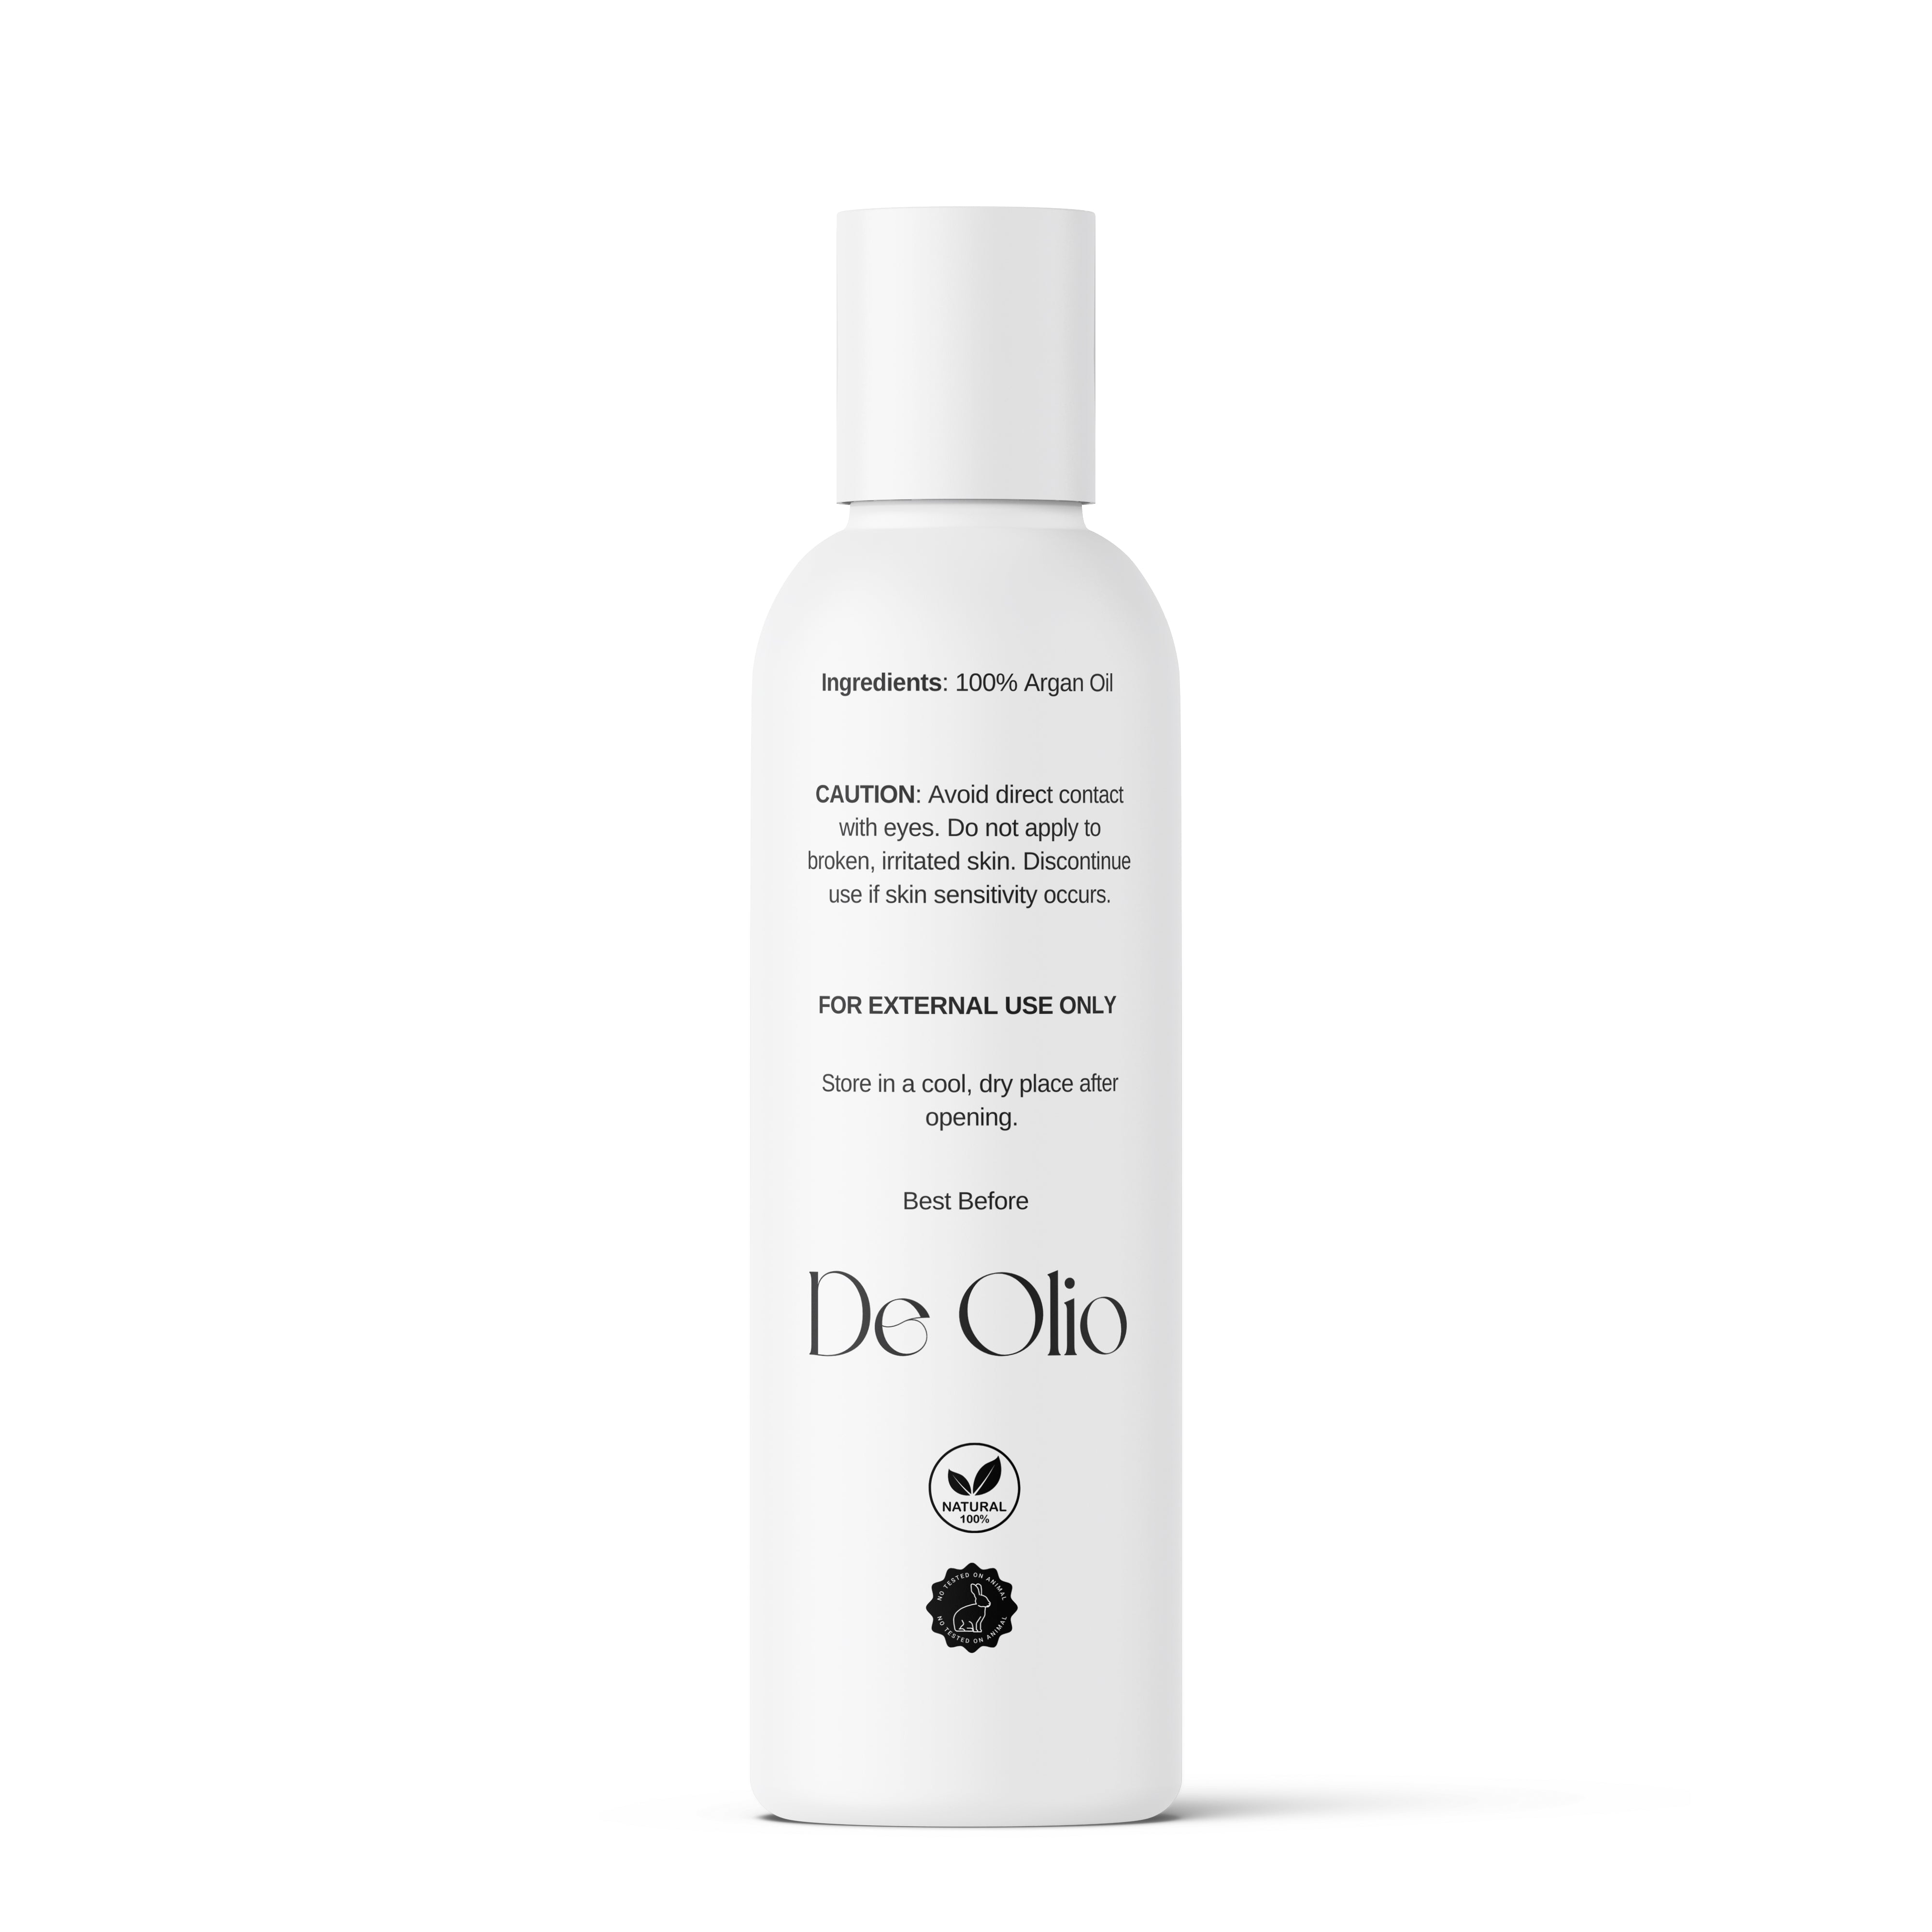 De Olio | Argan Oil of Morocco | 100% Pure & Natural | Refined | Cold Pressed | Carrier Oil for Skin, Face & Hair